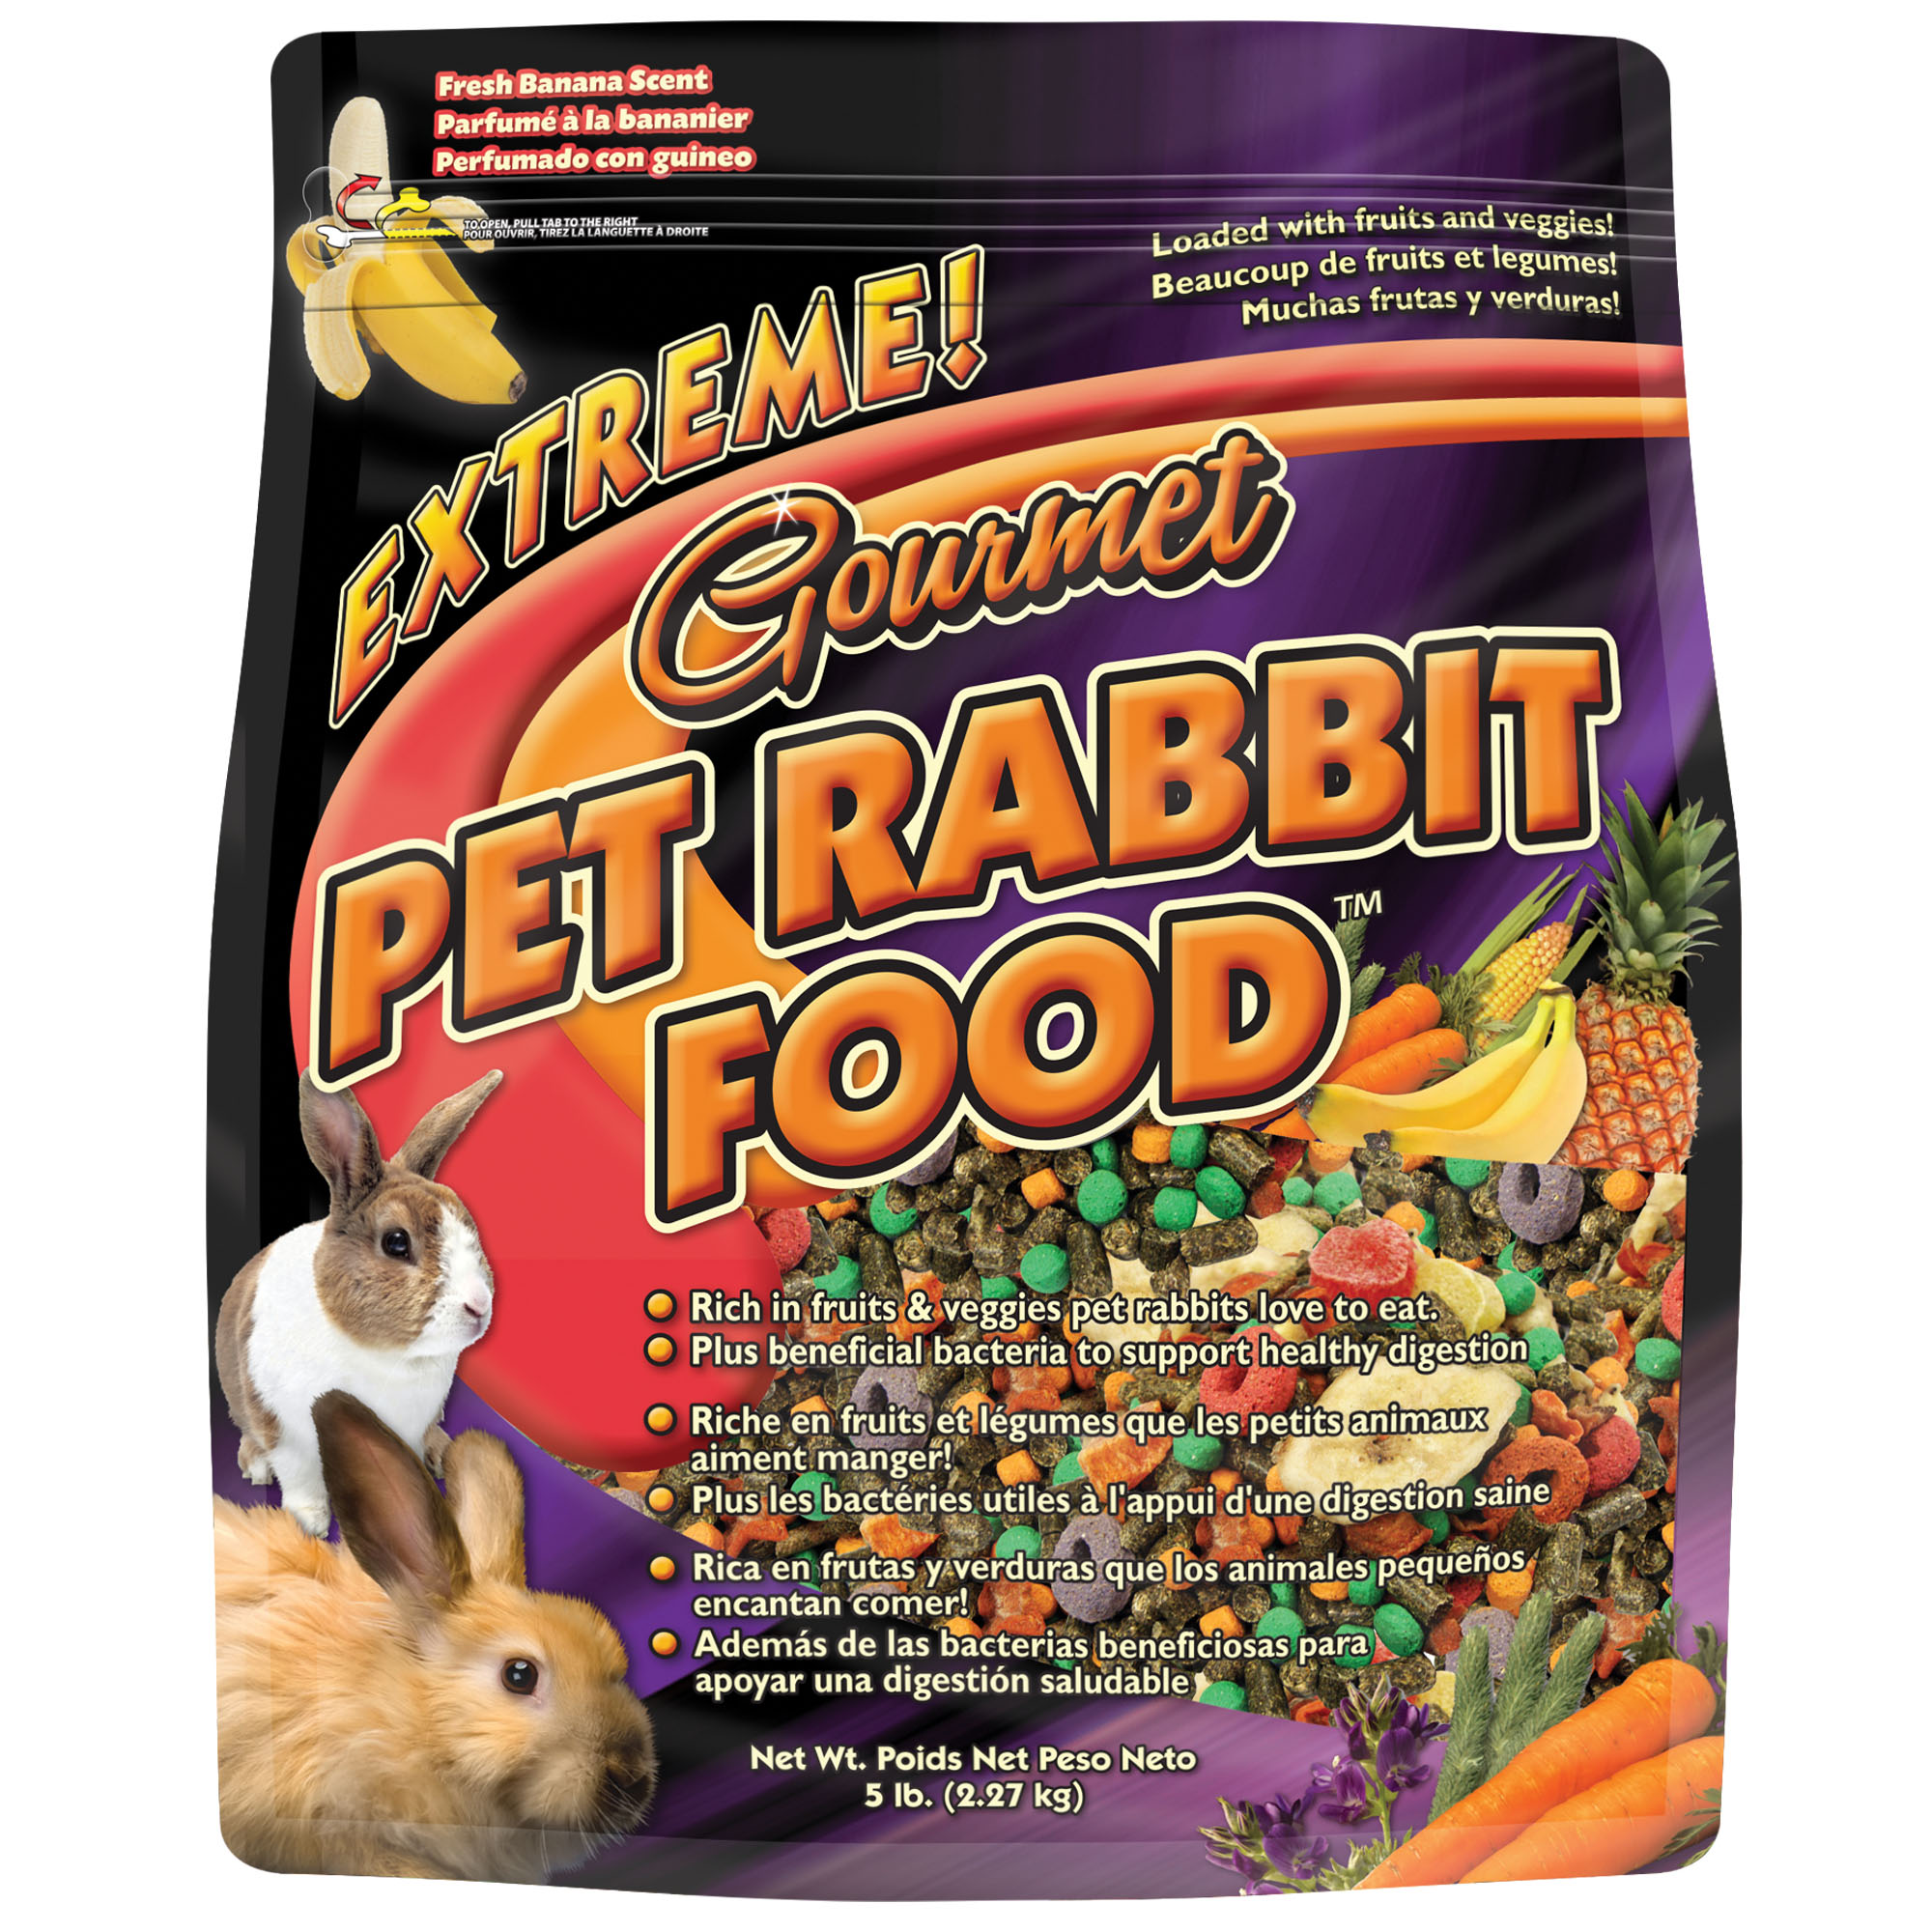 What food do rabbits find irresistible?